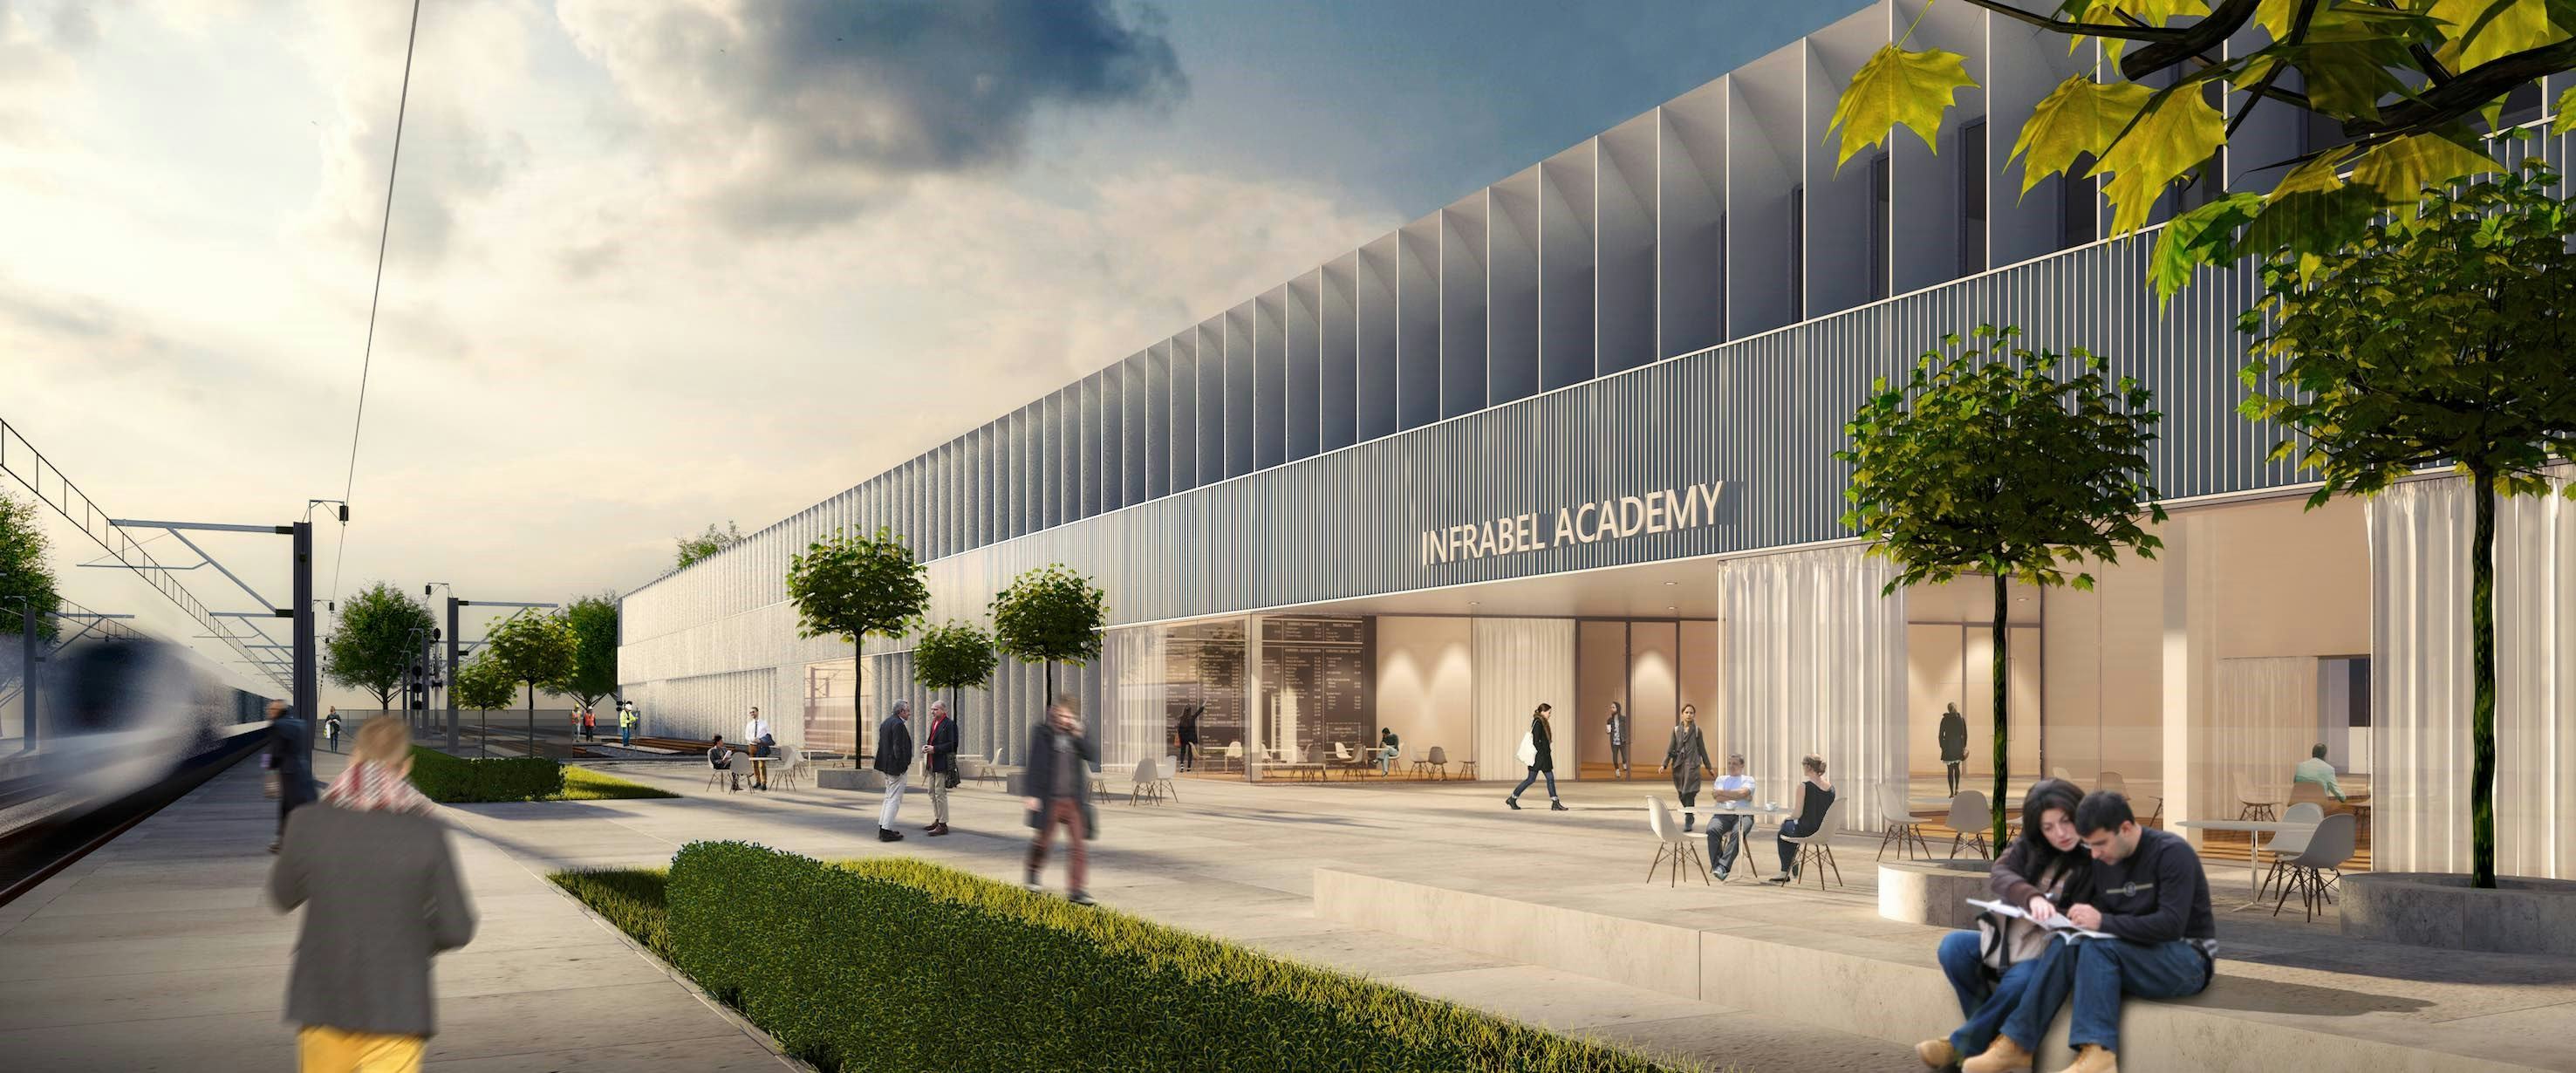 Infrabel Academy Brussel - Atelier Kempe Thill